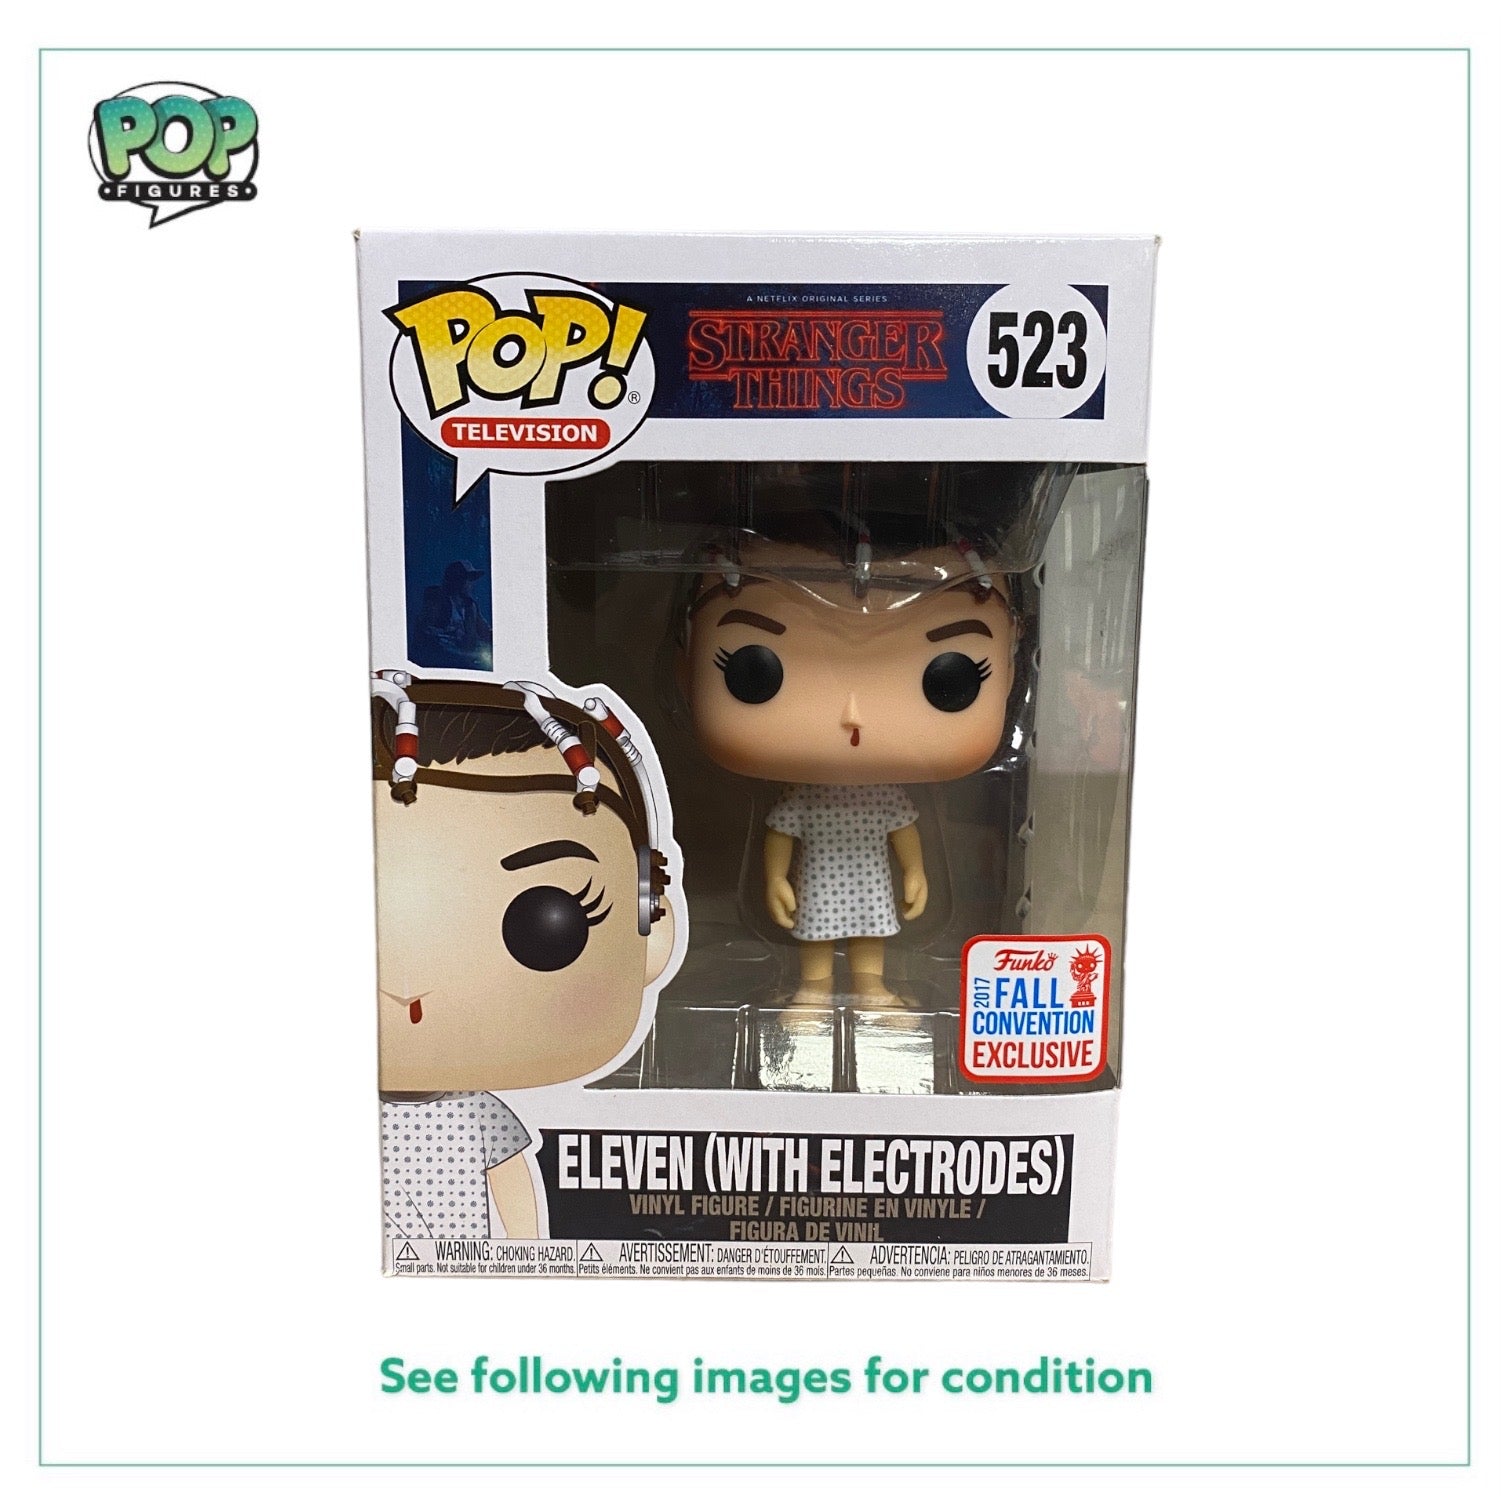 Eleven (With Electrodes) #523 Funko Pop! - Stranger Things - NYCC 2017 Shared Exclusive - Condition 8.25/10